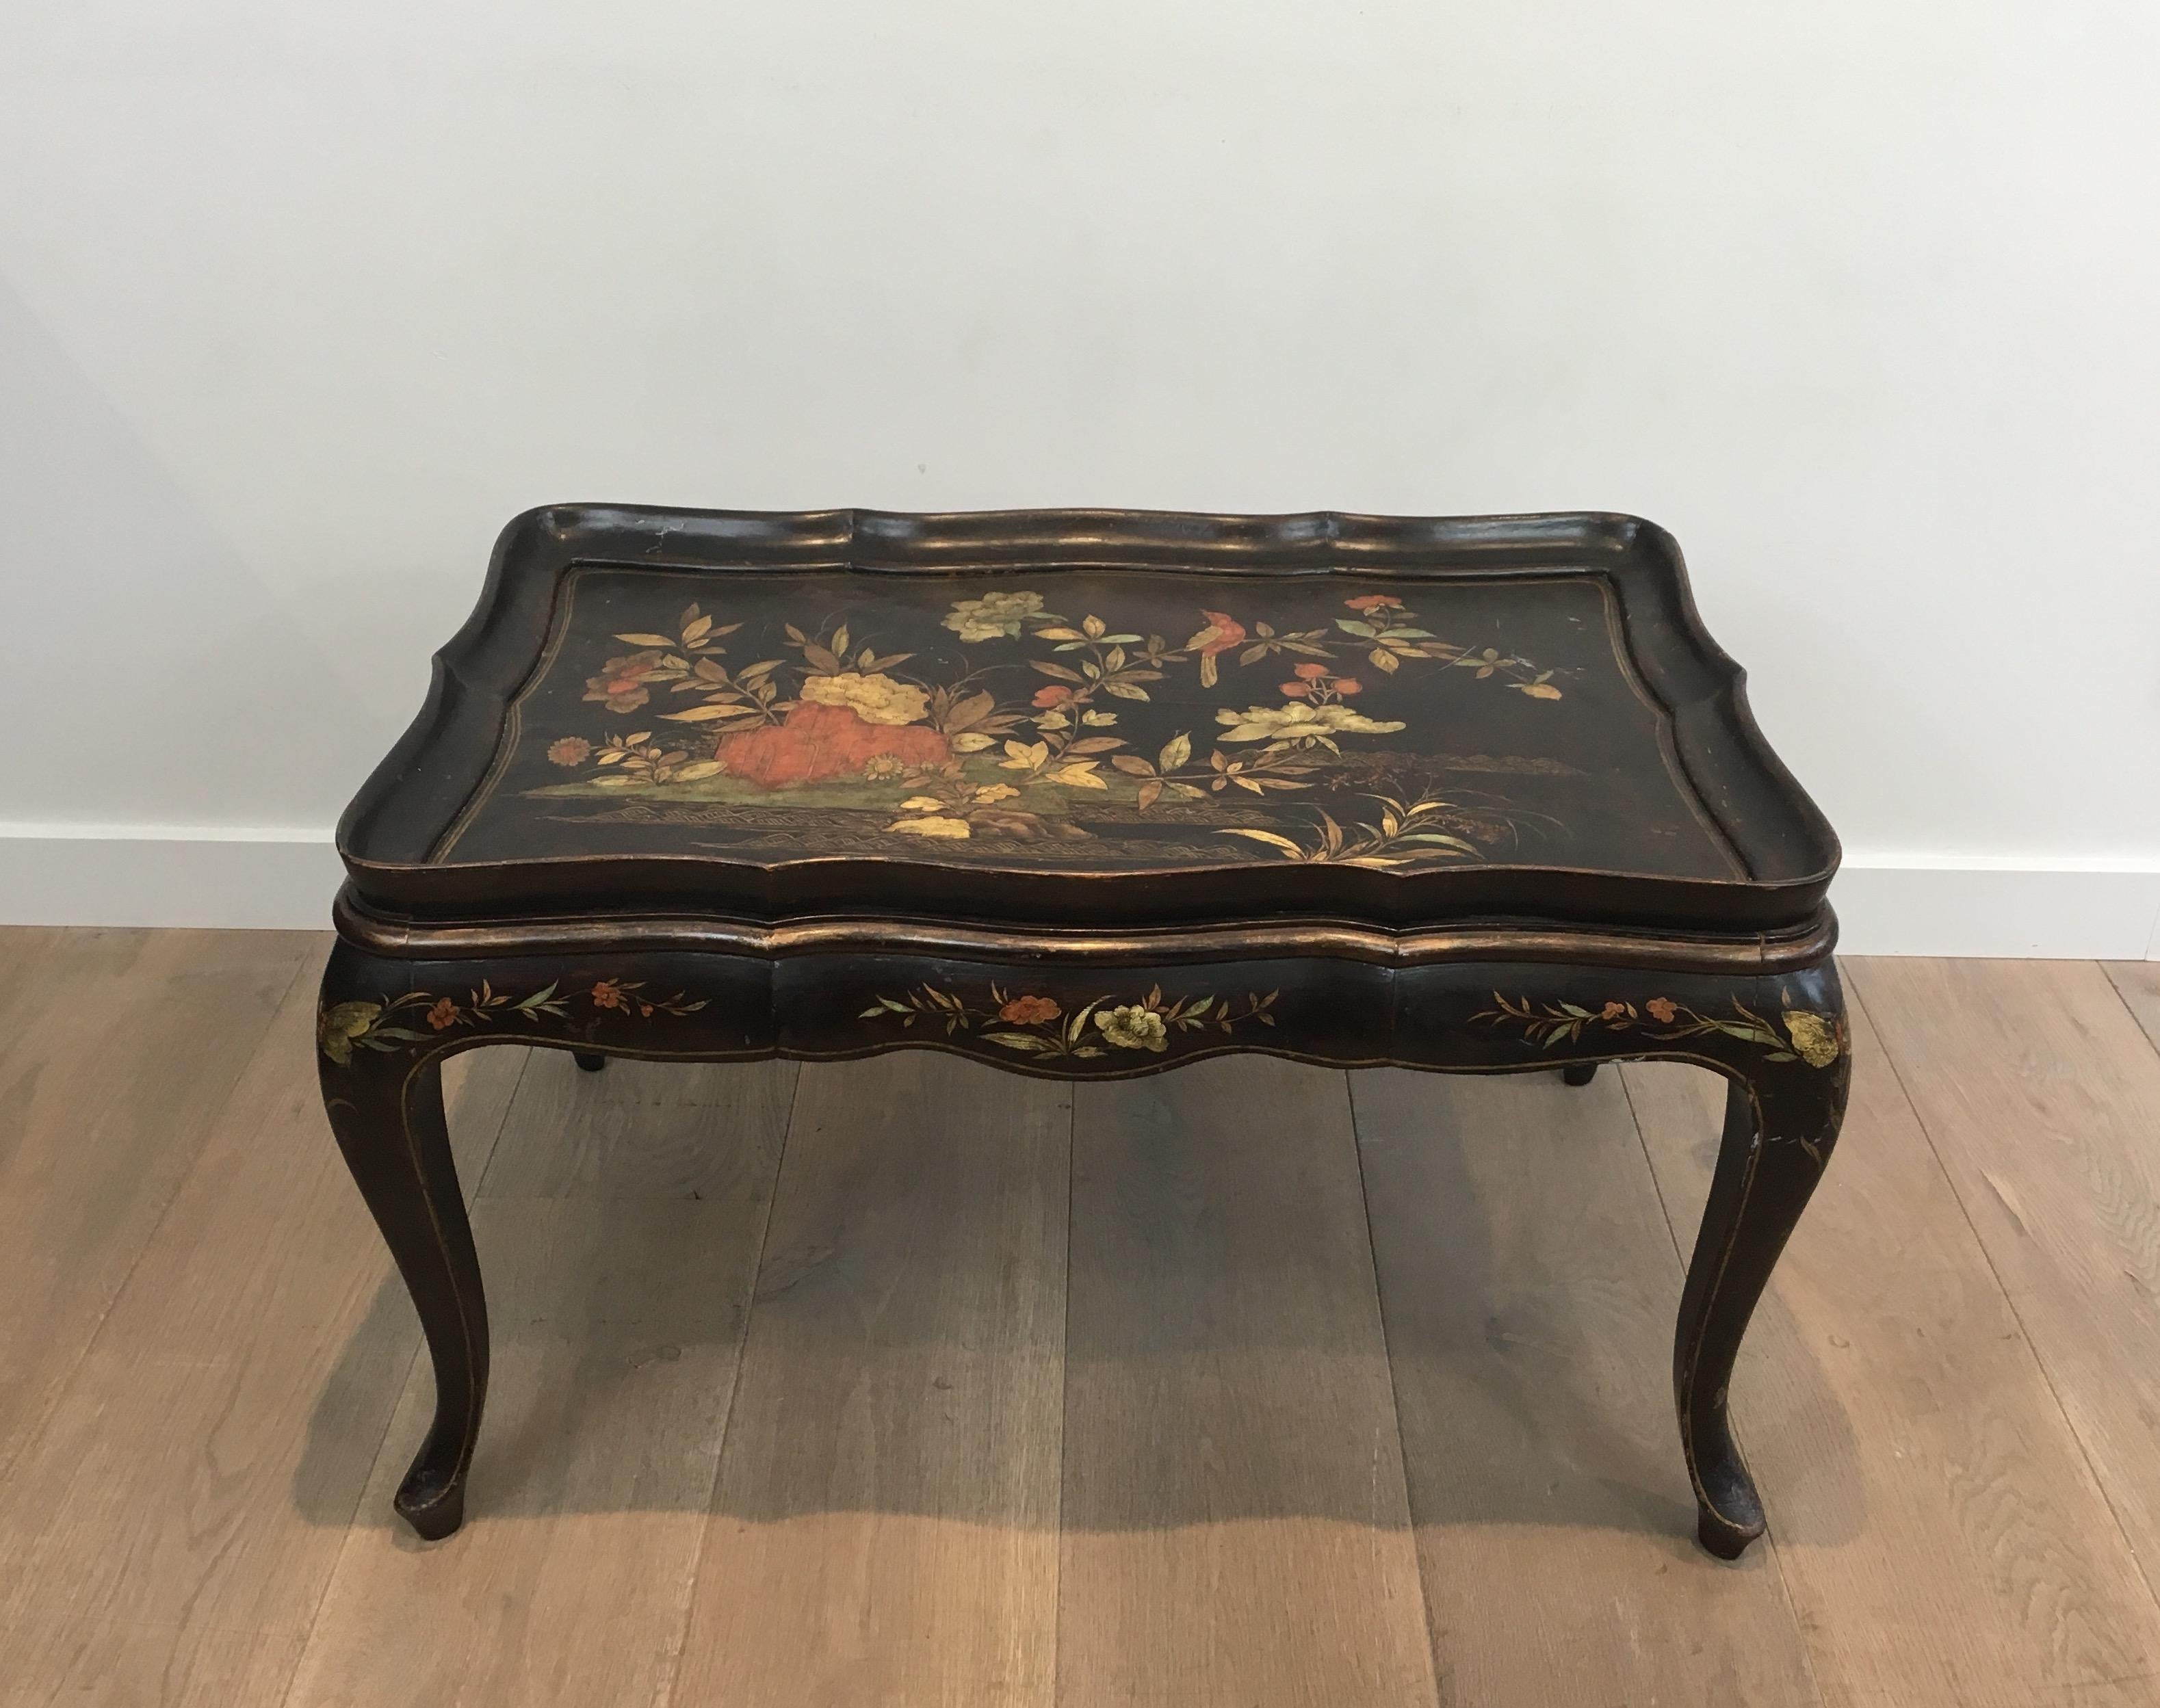 This neoclassical style coffee table is black lacquered with a beautiful polychrome and gilt flowers decors. This is a very elegant coffee table in the style of famous French designer Maison Hirch, circa 1940.